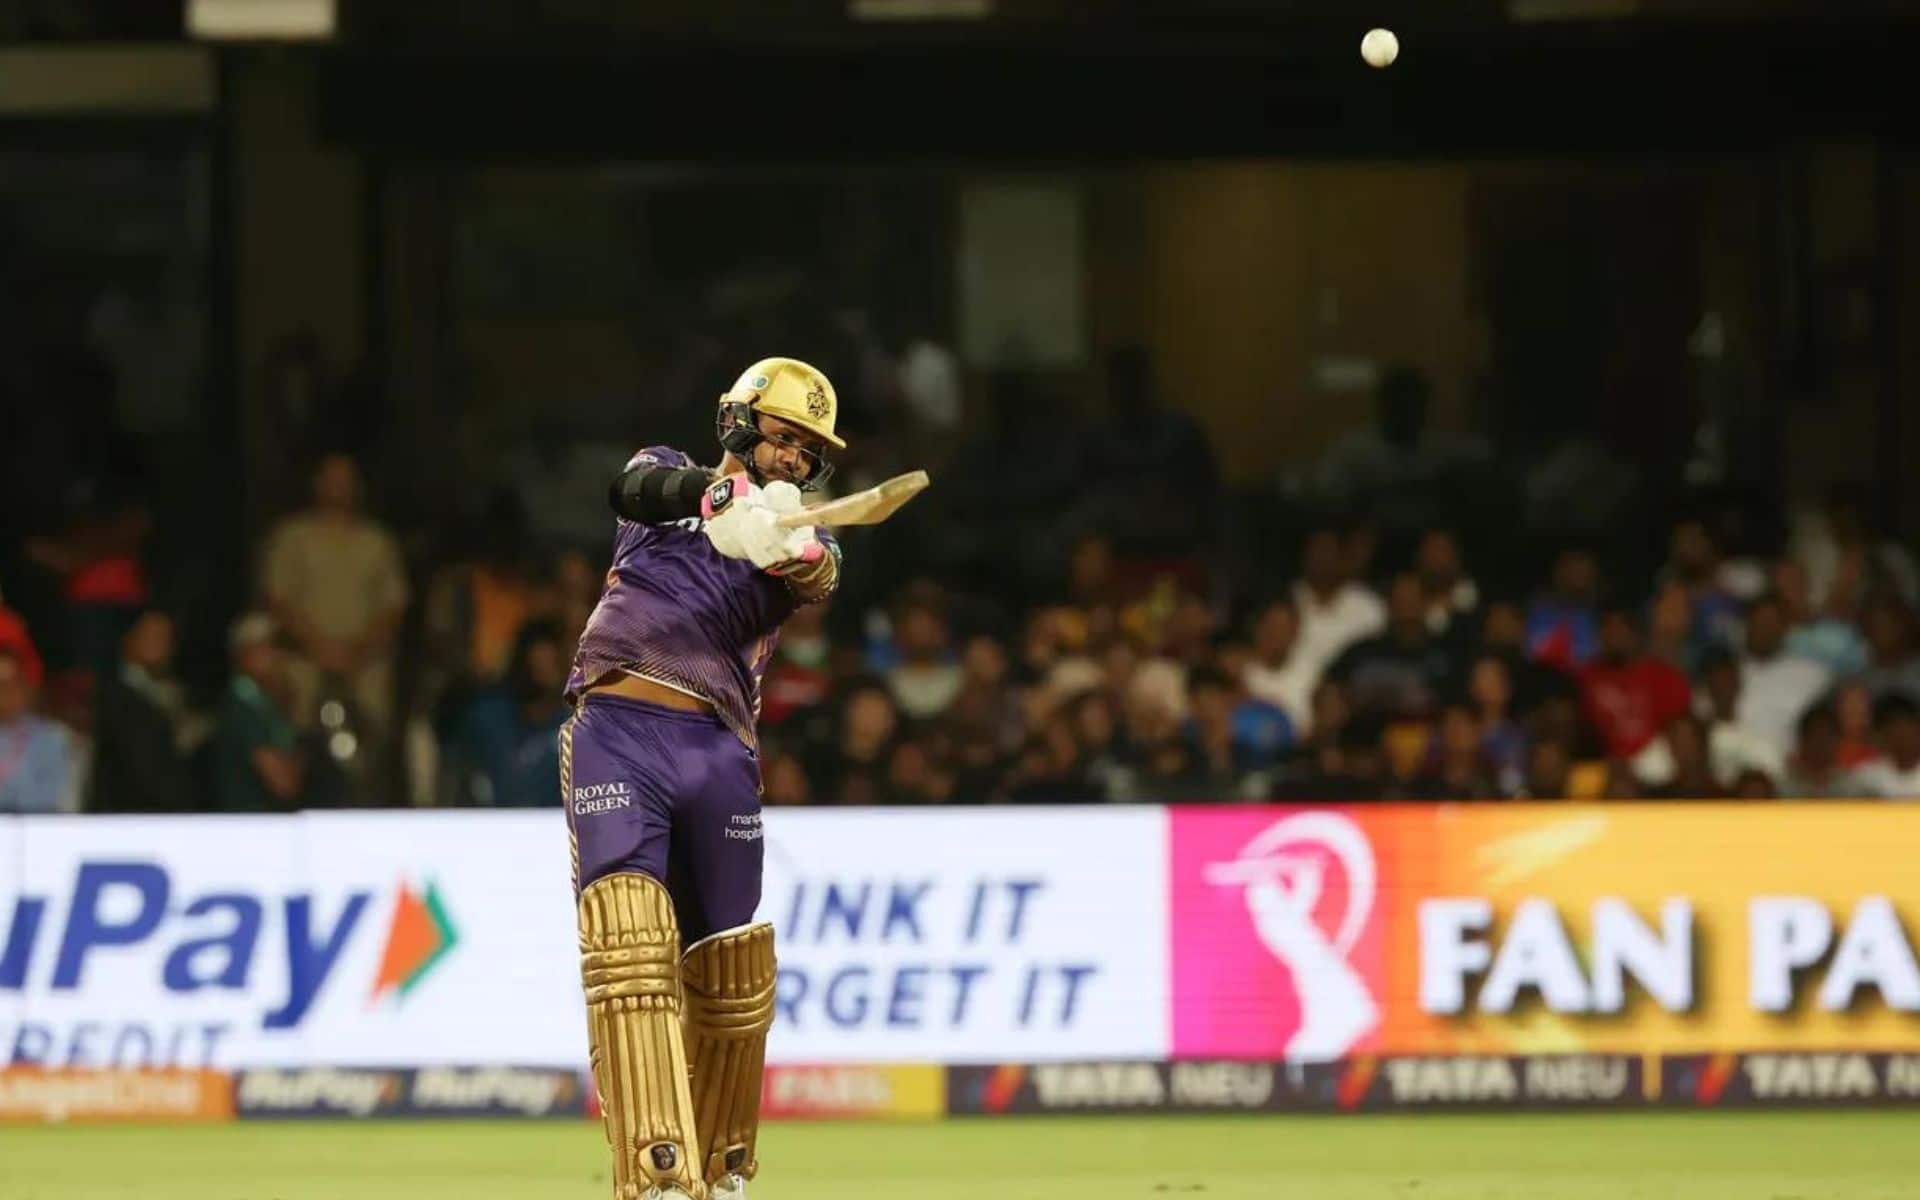 Sunil Narine looked great with the bat against RCB [iplt20.com]